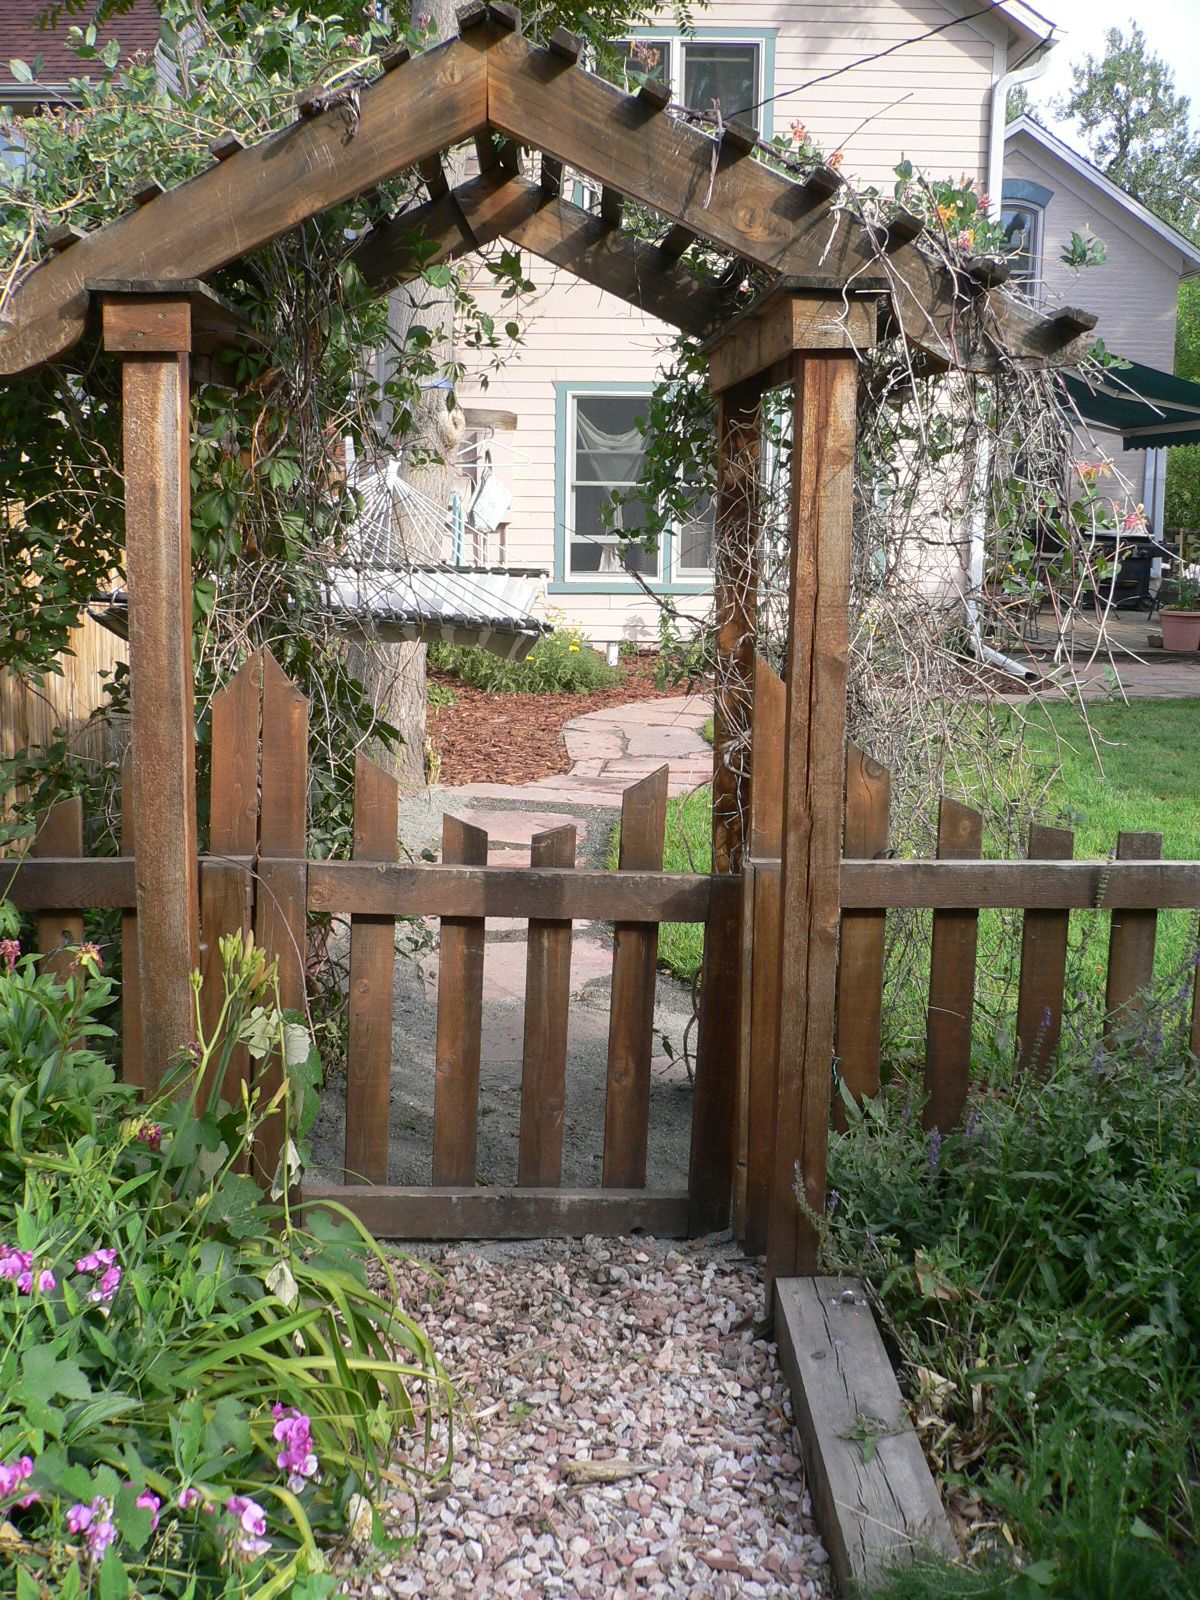 gate arches | Garden Arch for gate entrance | Gate arches ...